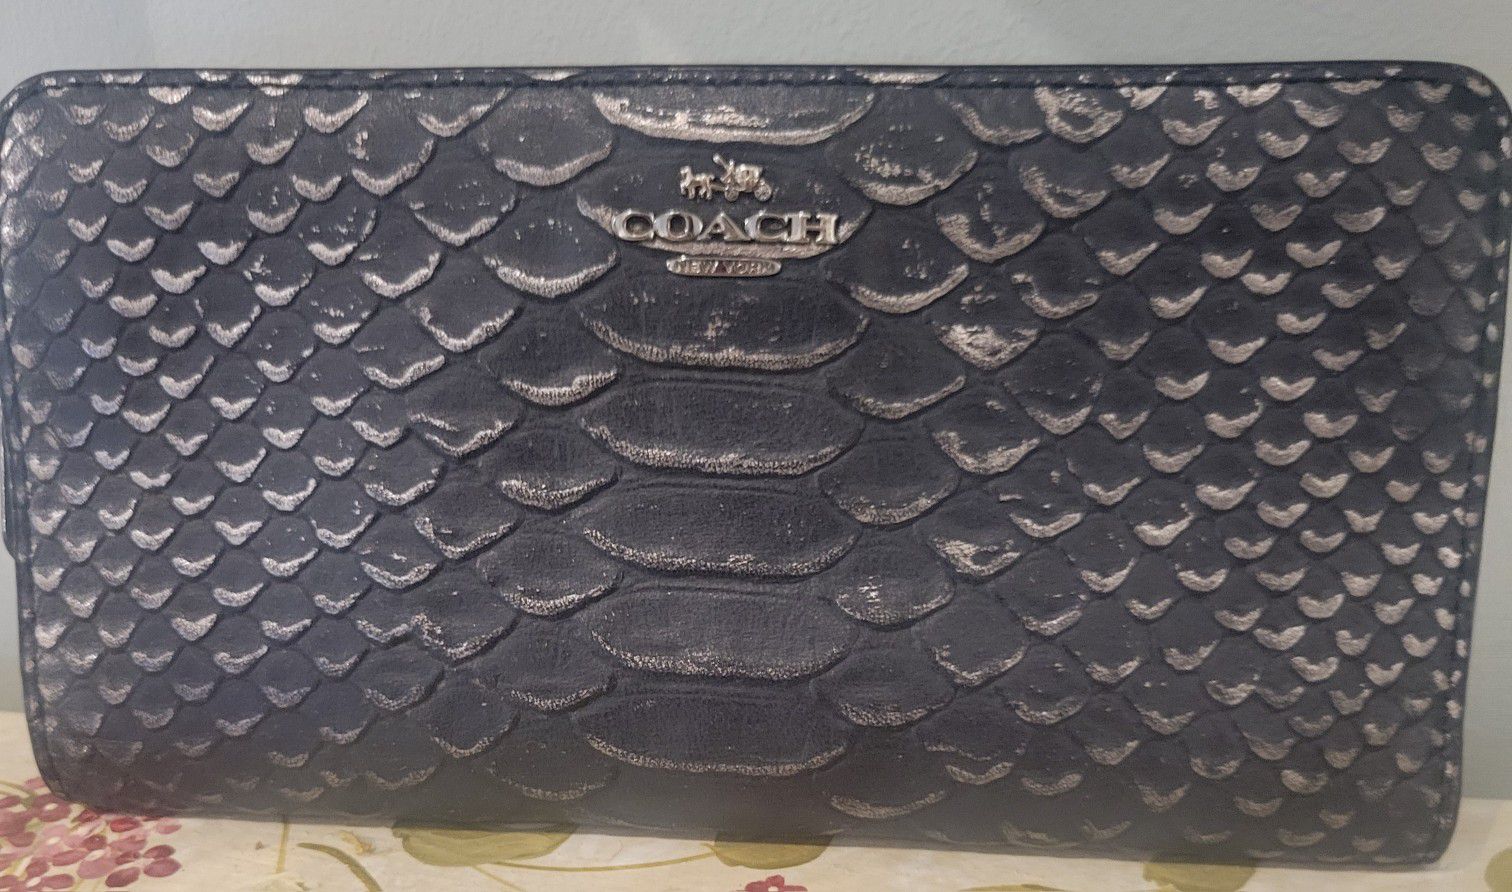 Coach Snake-Embossed Leather Wallet